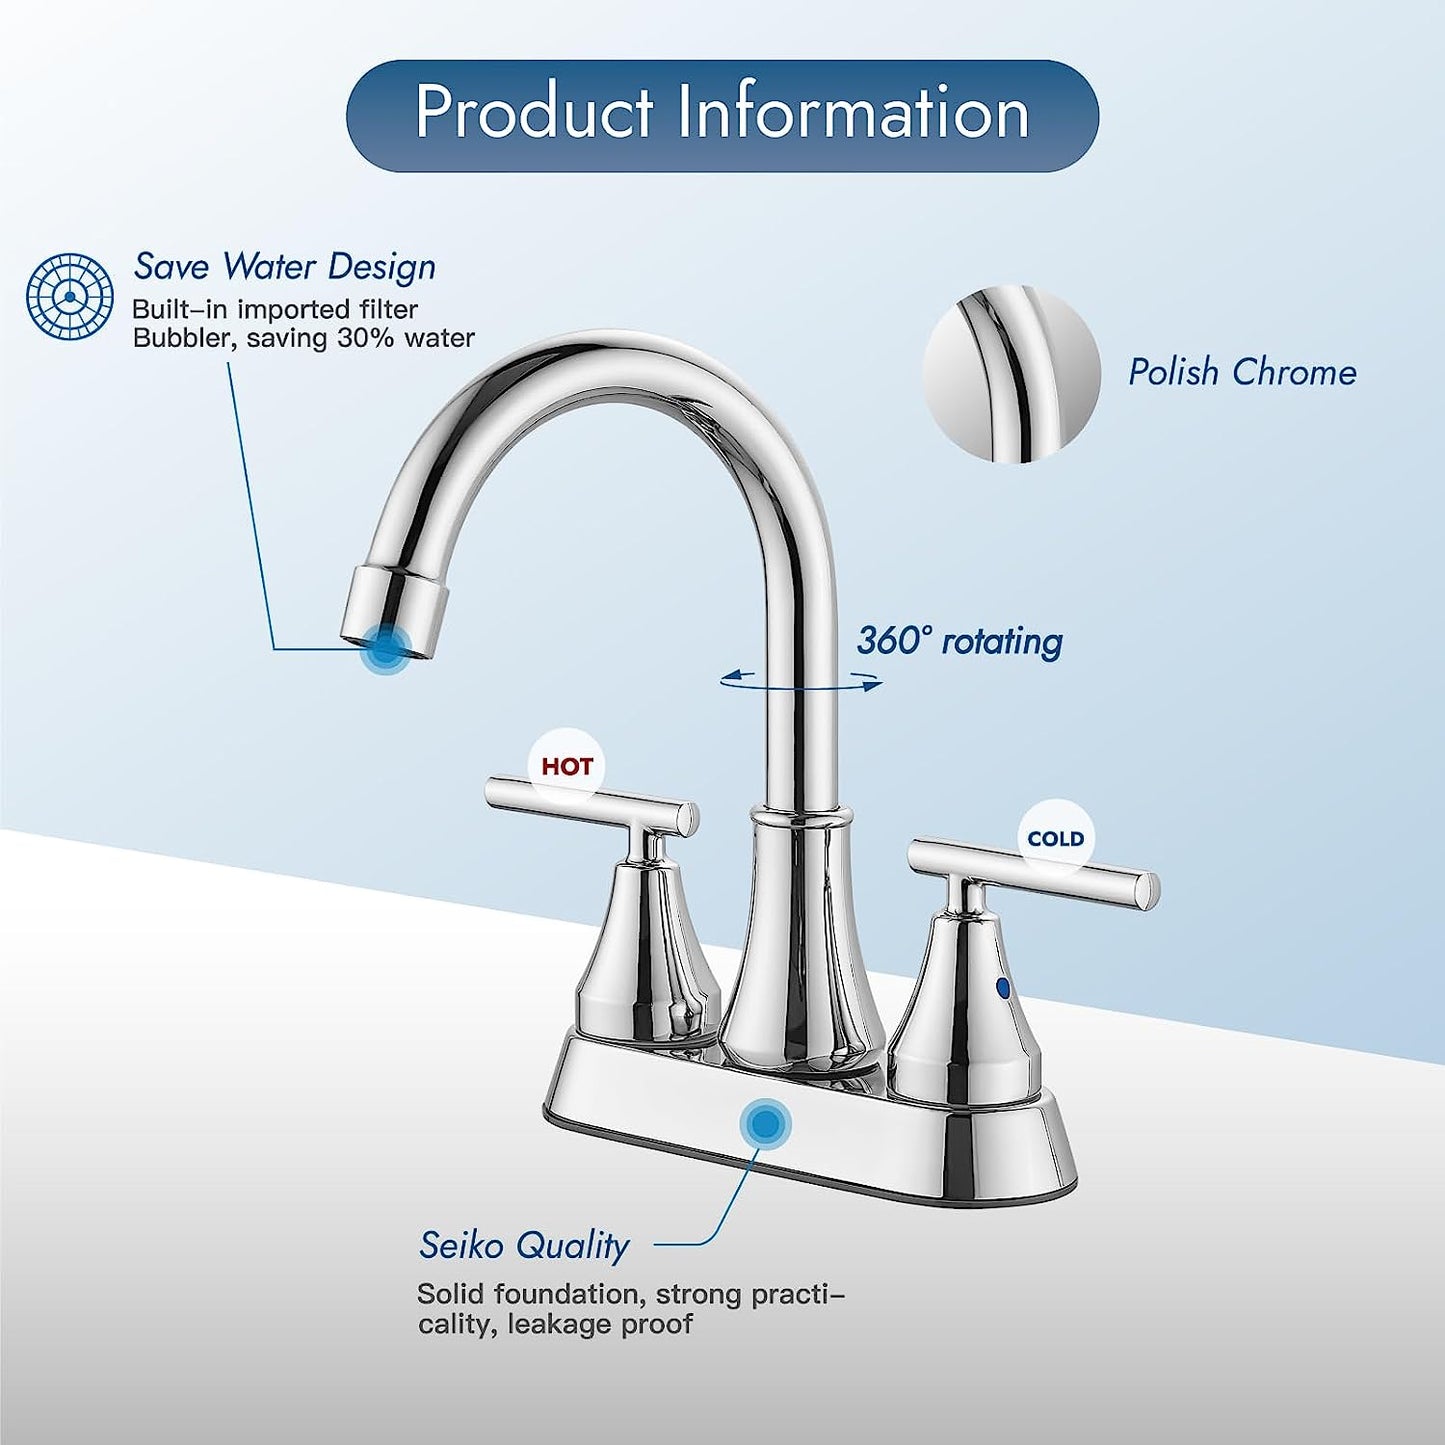 
                  
                    Cinwiny Bathroom Faucets 4 Inch Centerset Bathroom Sink Faucet Deck Mounted Swivel Spout Vanity Lavatory Faucet with Pop-Up Drain 2 Handle Utility Rv Sink Faucet
                  
                